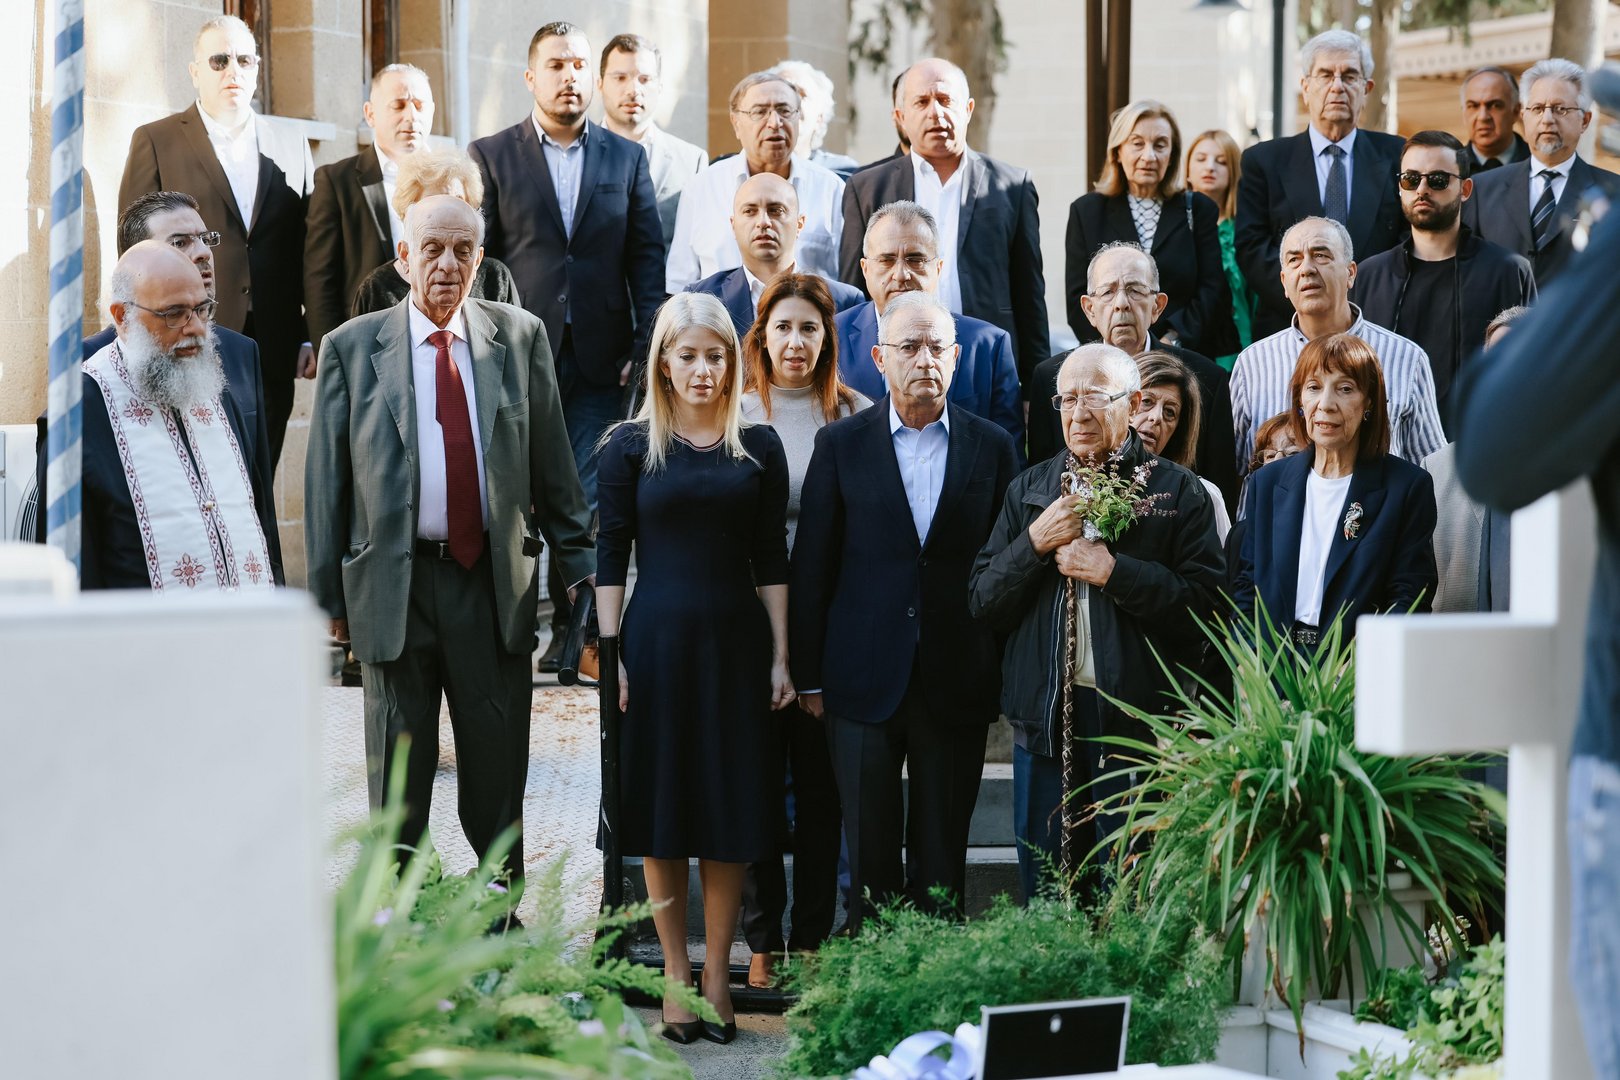 image Memorial service for former Cyprus president, Glafcos Clerides